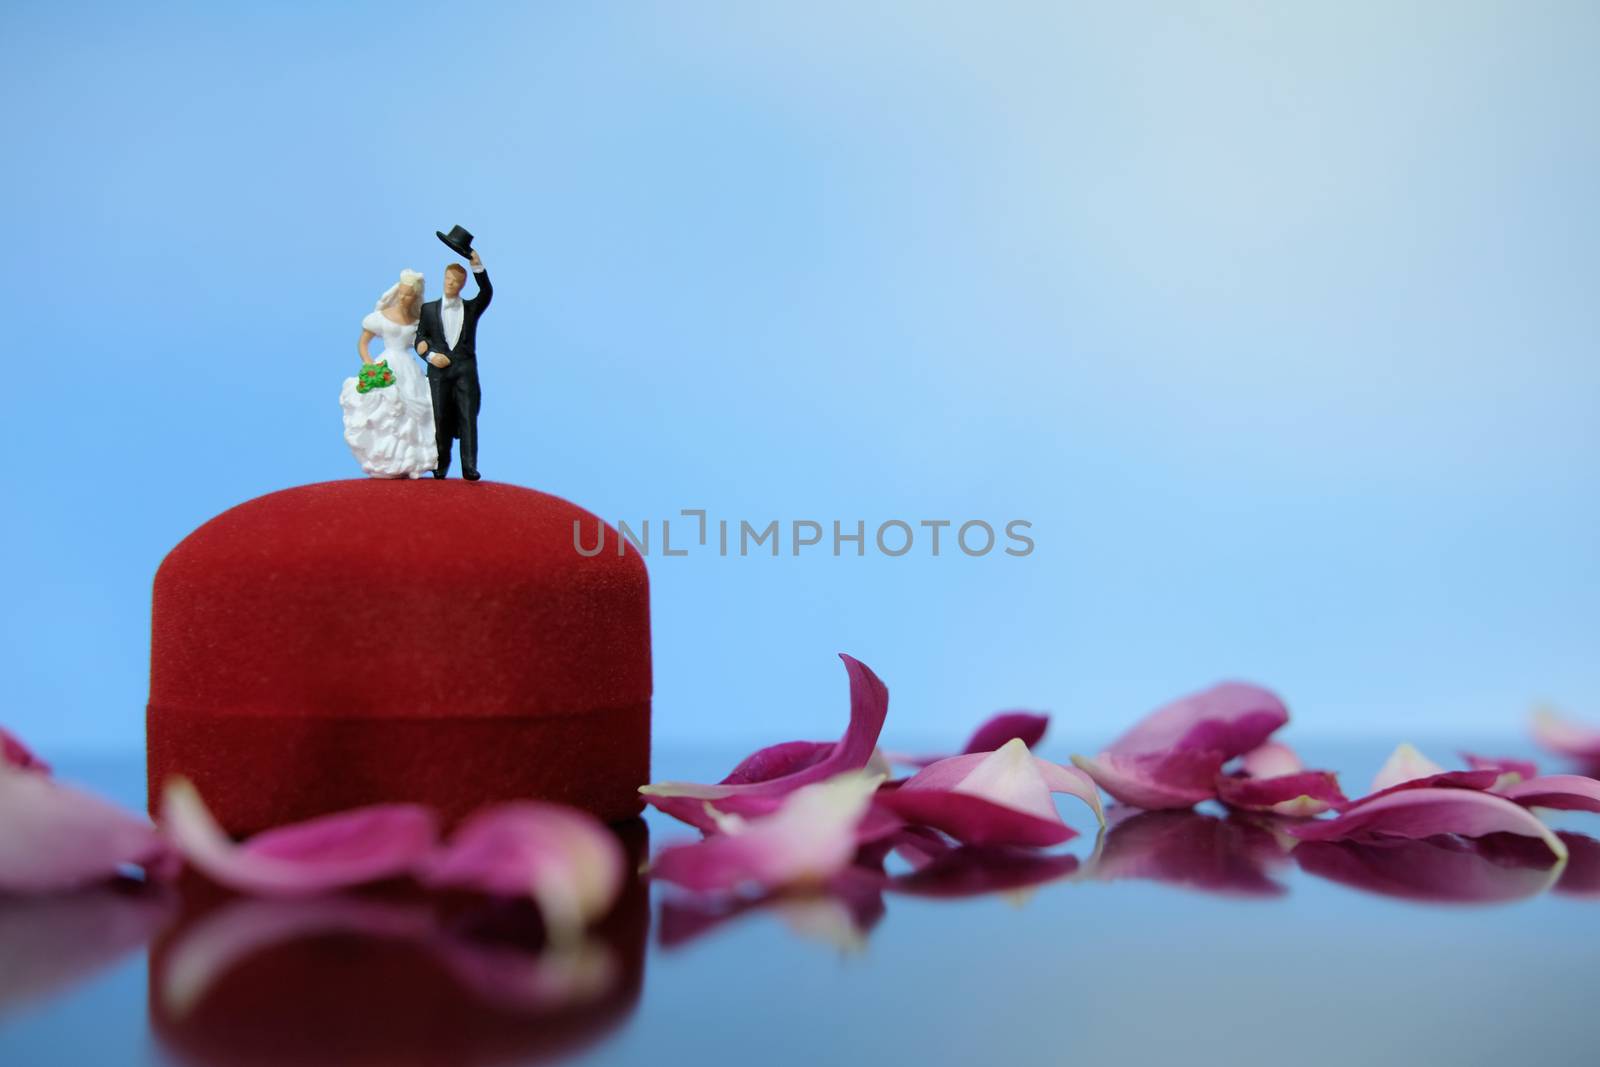 Miniature photography outdoor marriage wedding concept, bride and groom standing above ring box on red rose flower pile by Macrostud